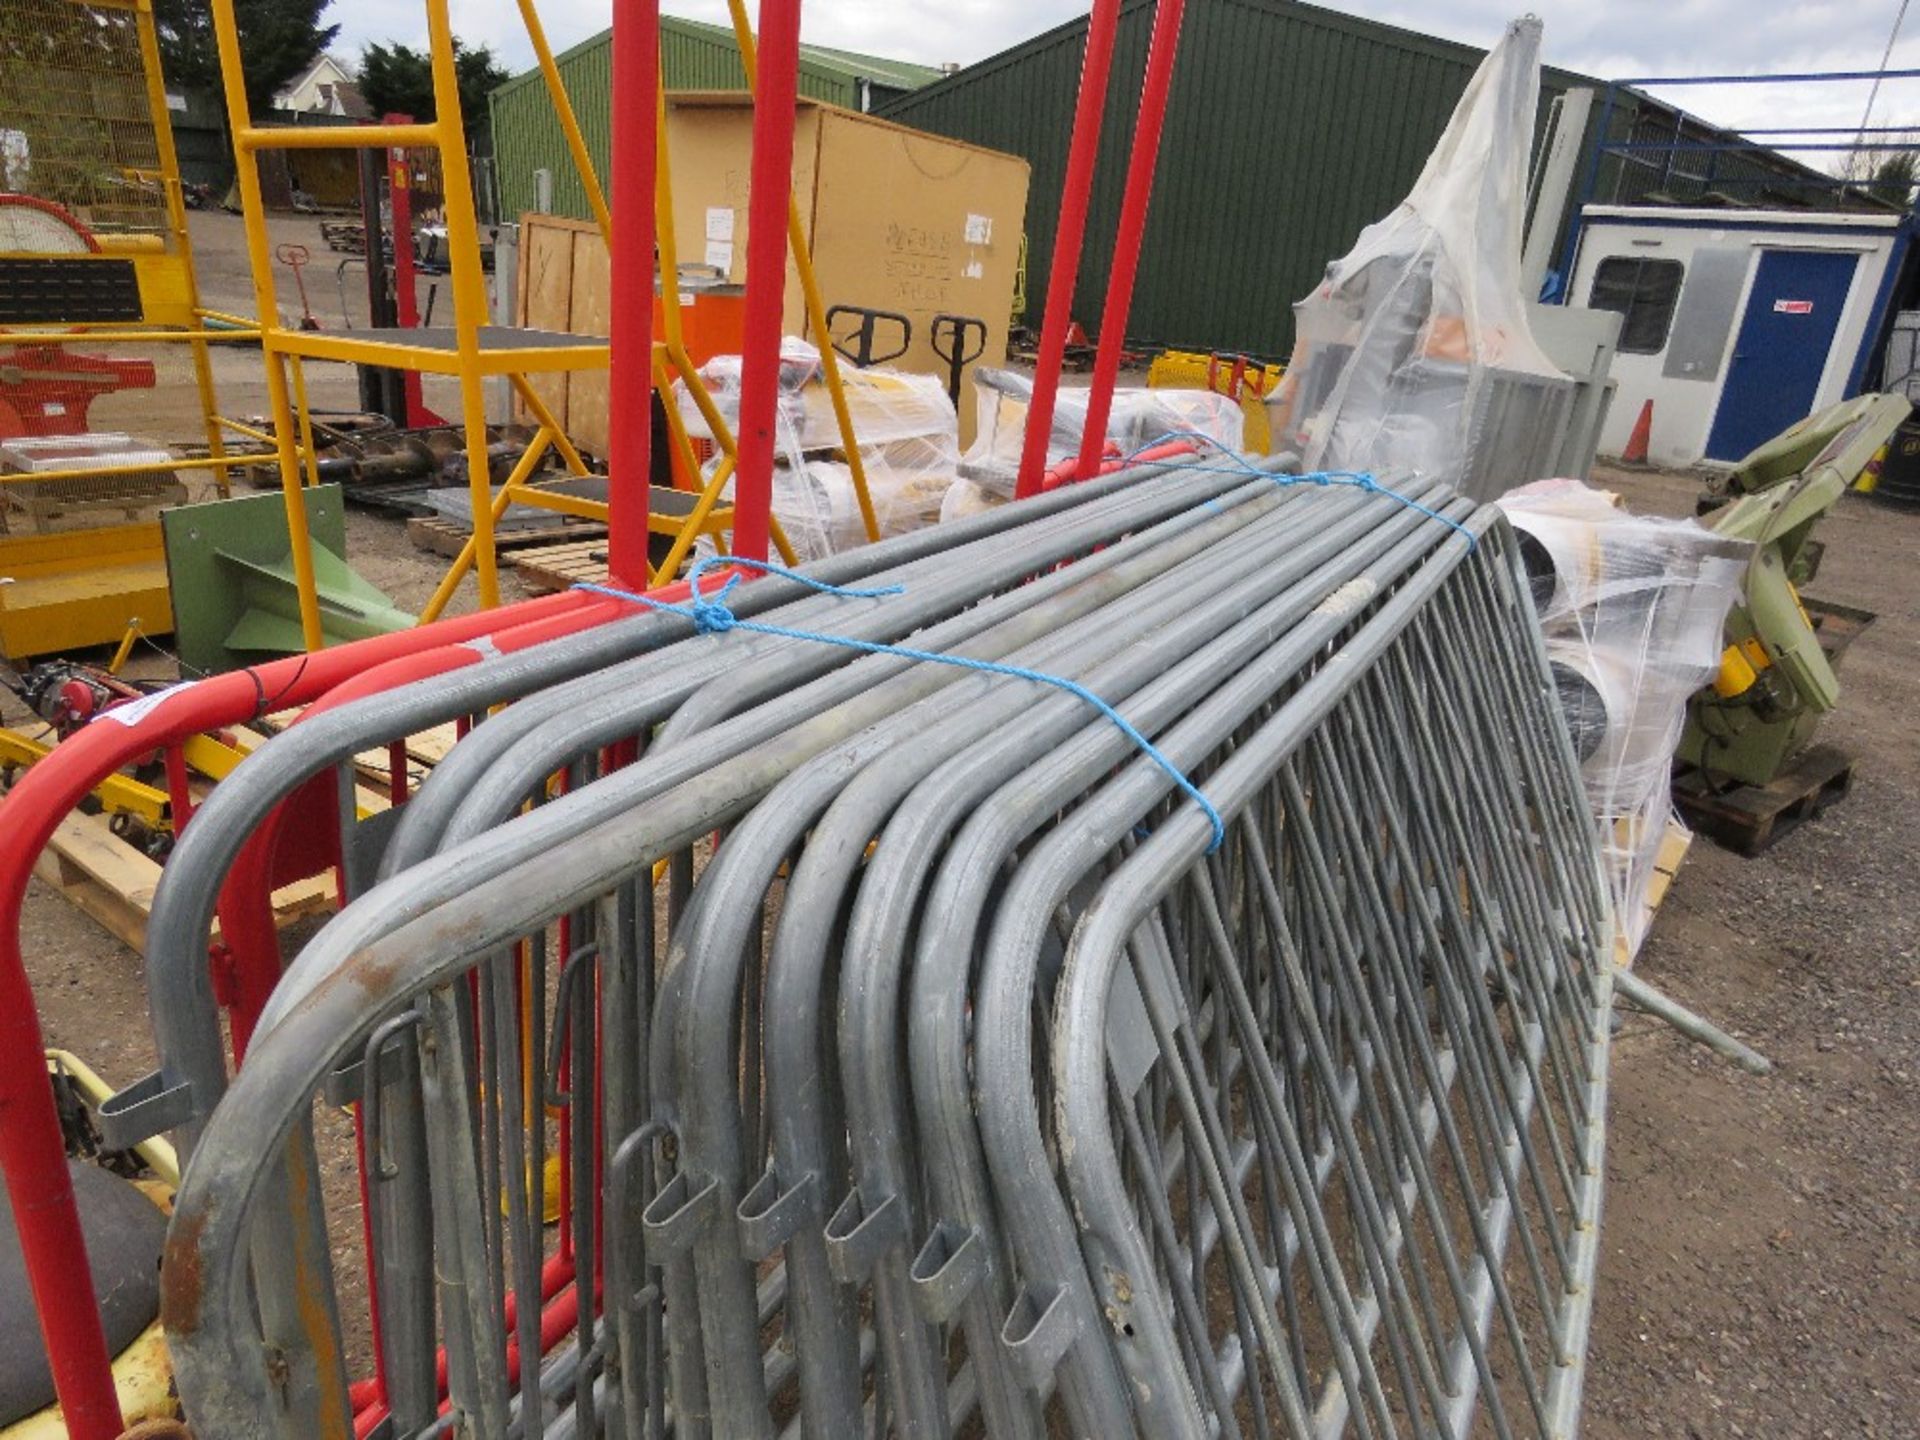 13 X METAL PEDESTRIAN / CROWD BARRIERS PLUS 2 X SAFETY GATES. - Image 2 of 3